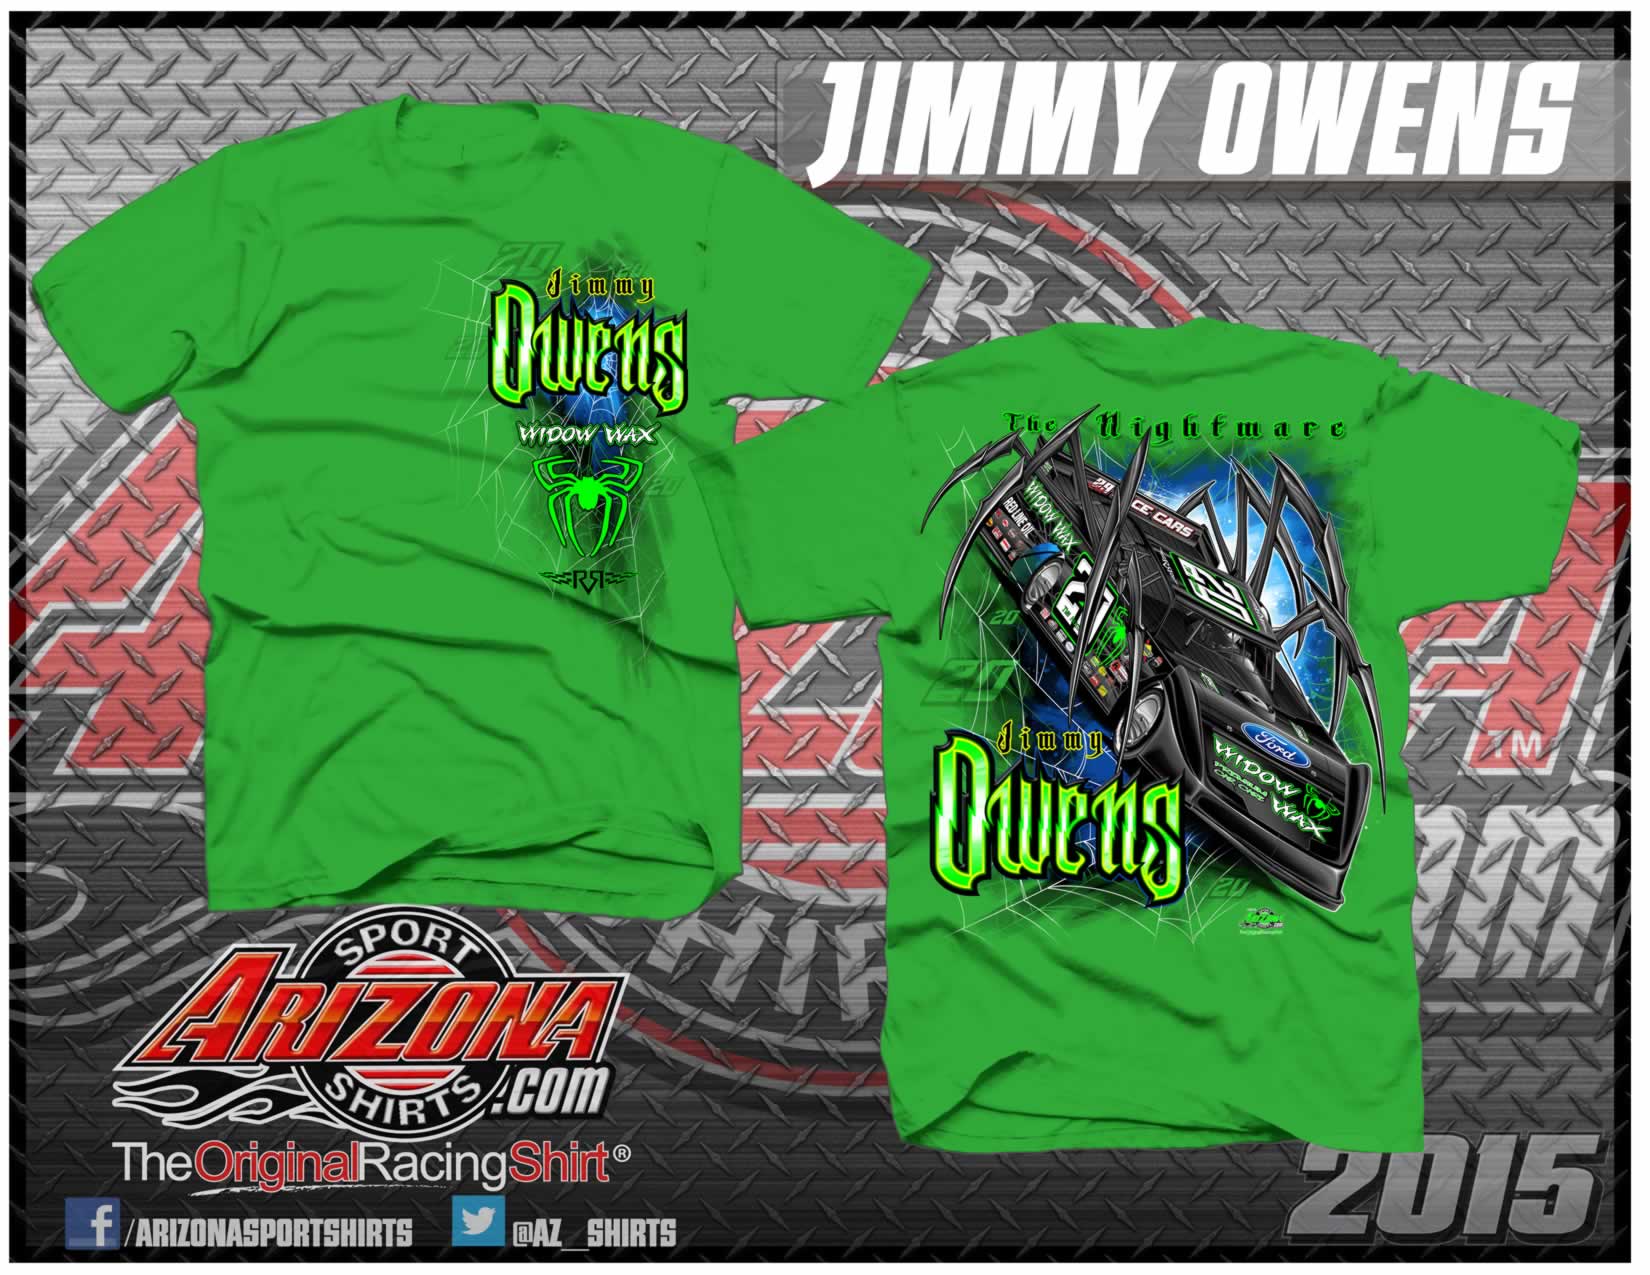 jimmy-owens-spider-nightmare-2015-shirt-layout-comp-electric-green